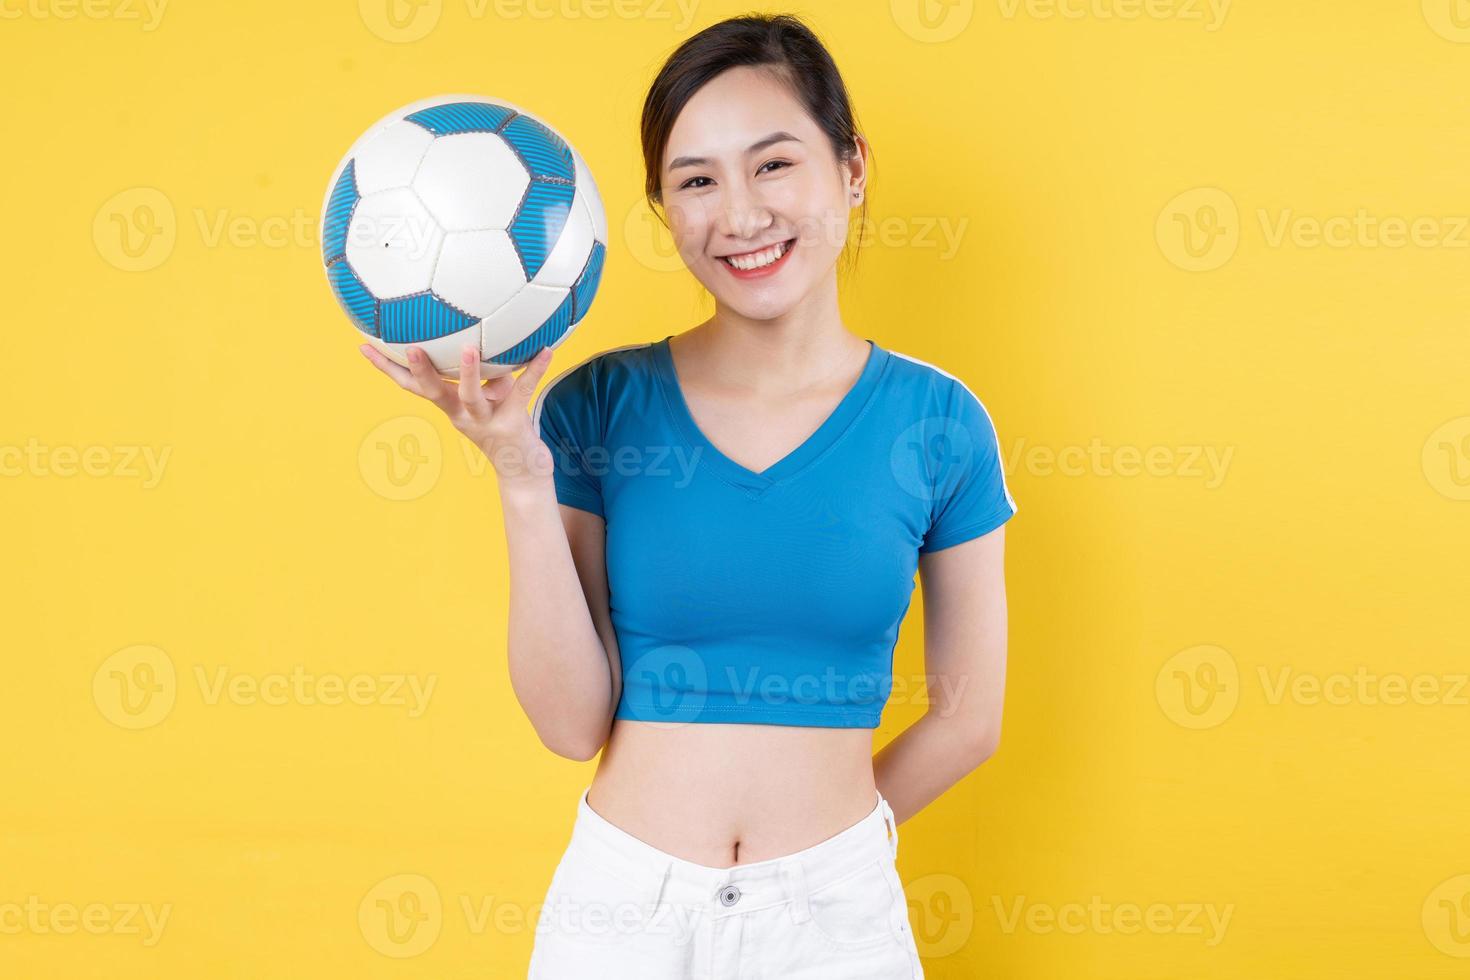 portrait of young dynamic girl holding ball in hand isolated on yellow background photo